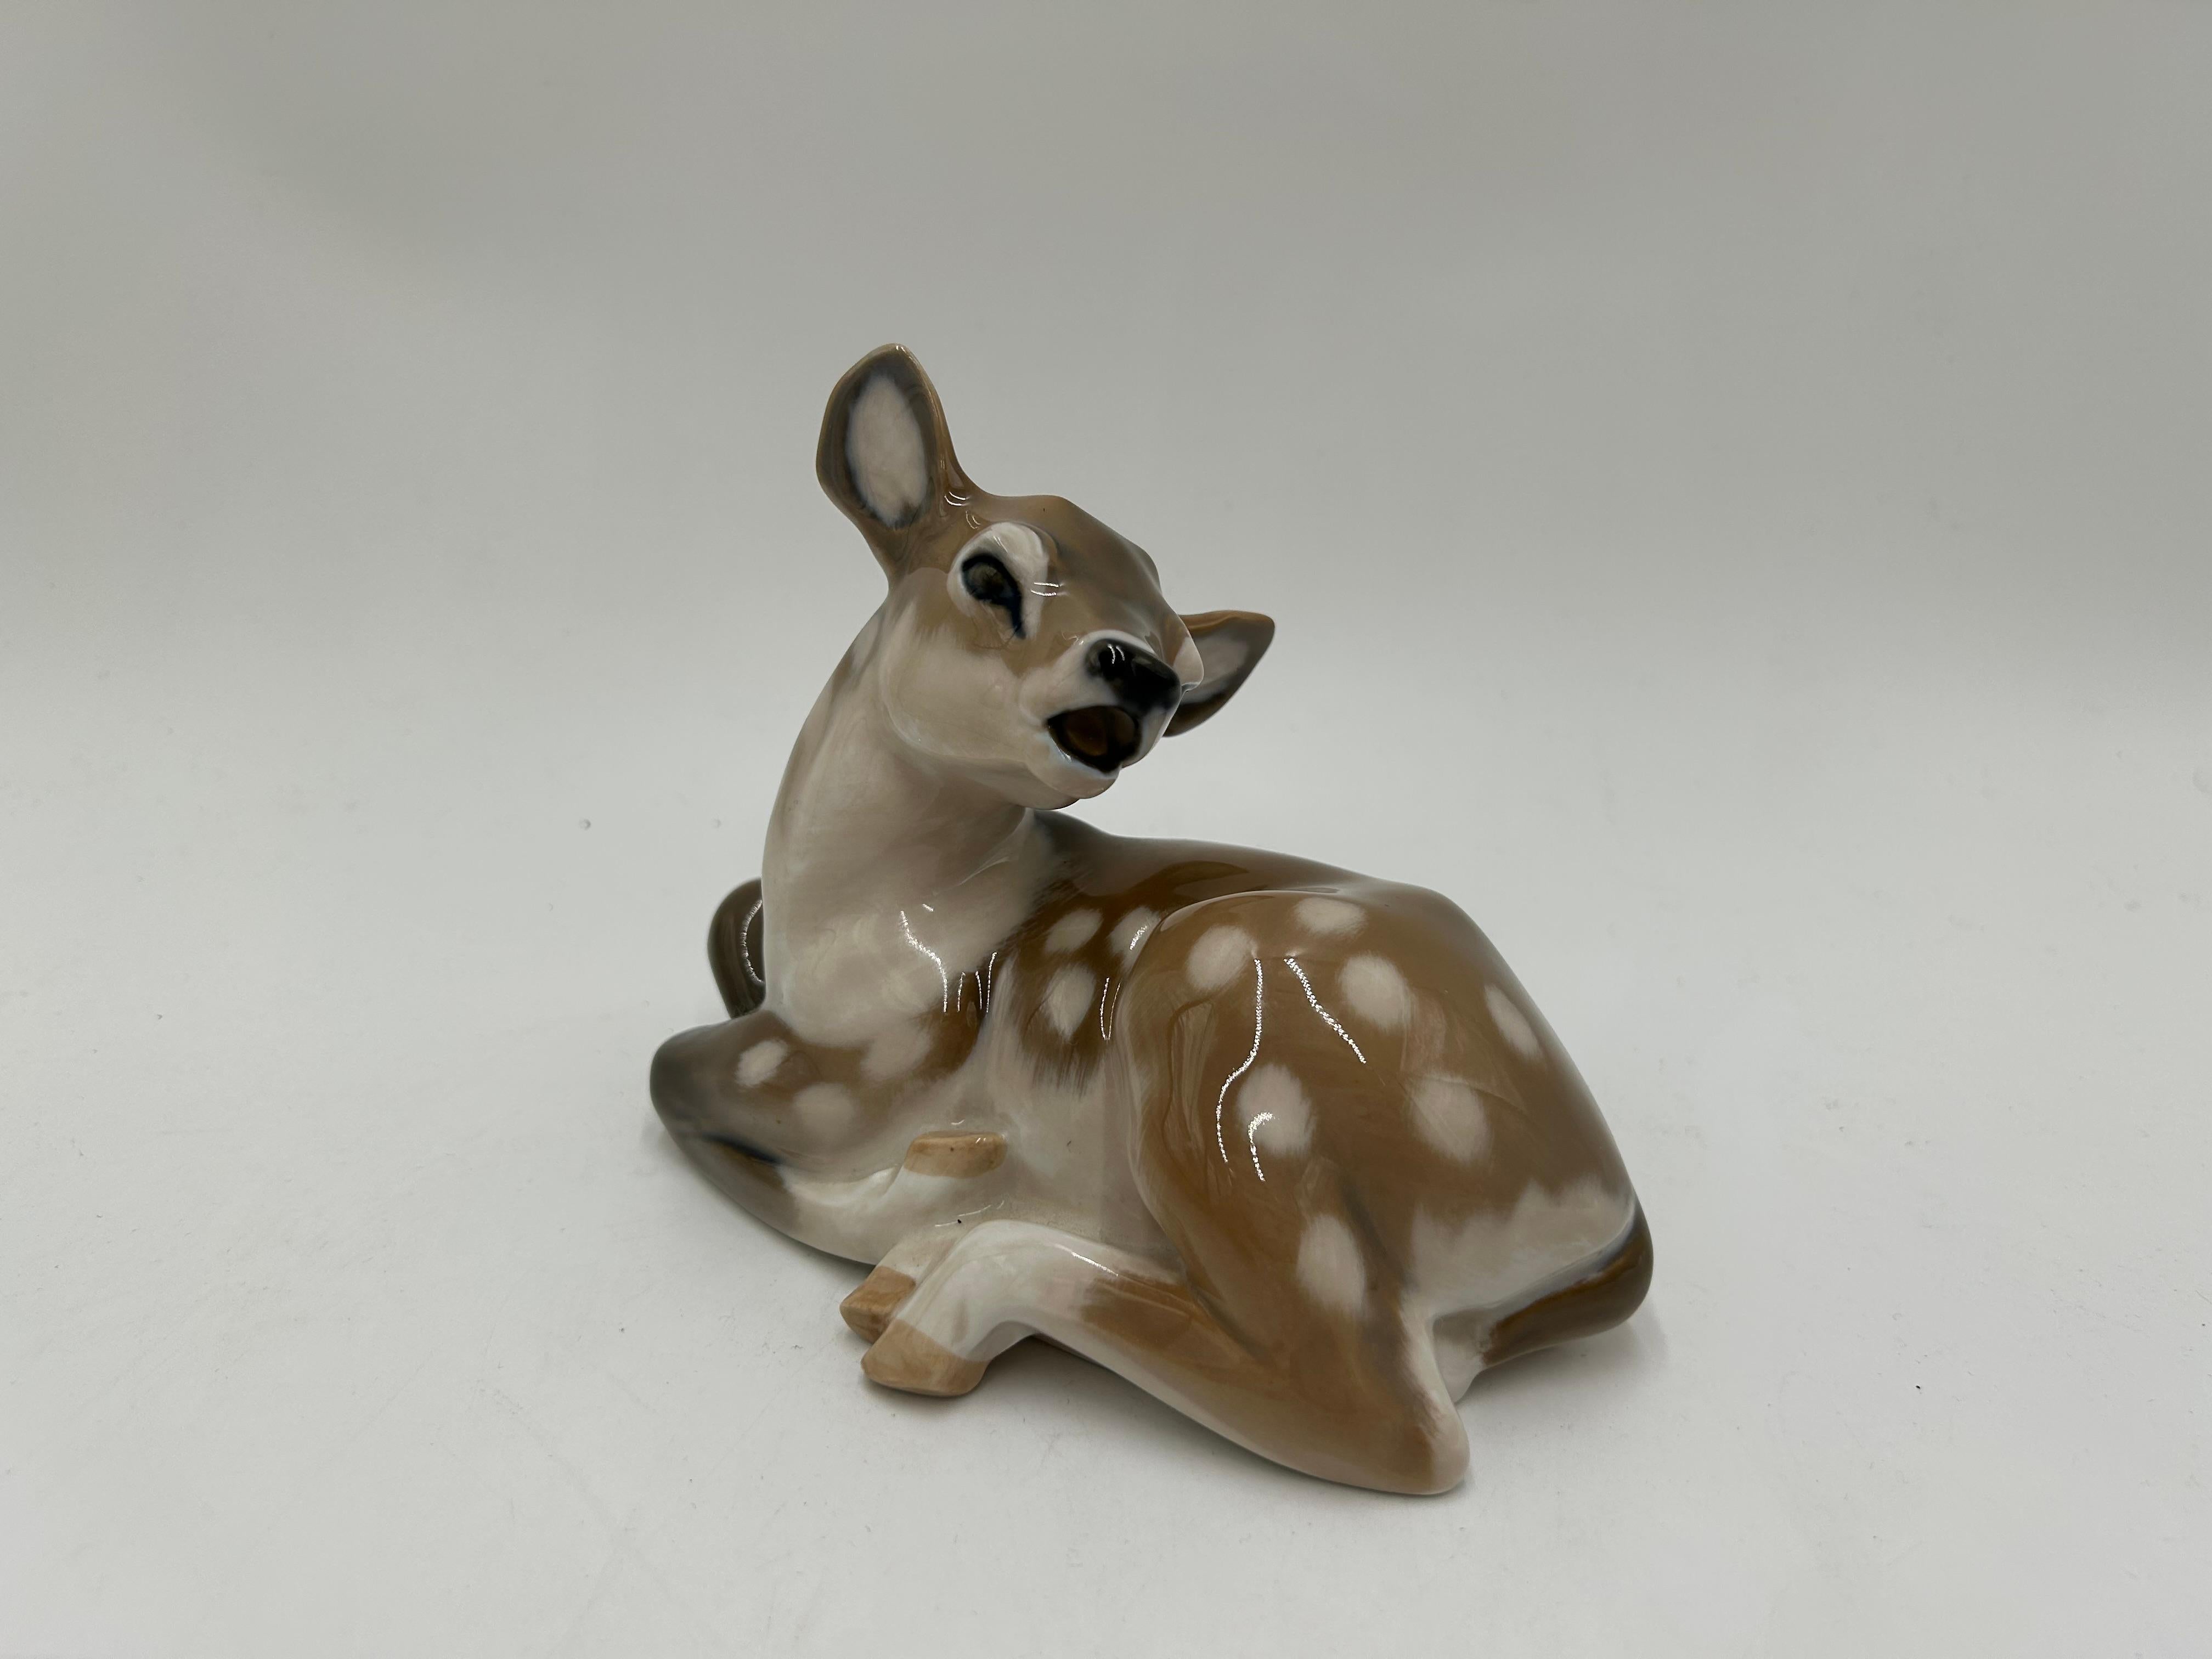 Porcelain figurine of a deer model #2609
Produced by the Danish manufacture Royal Copenhagen
Mark used in 1969-1973.
Very good condition, no damage
Measures: Height: 13cm
Width: 16cm
Depth: 9cm